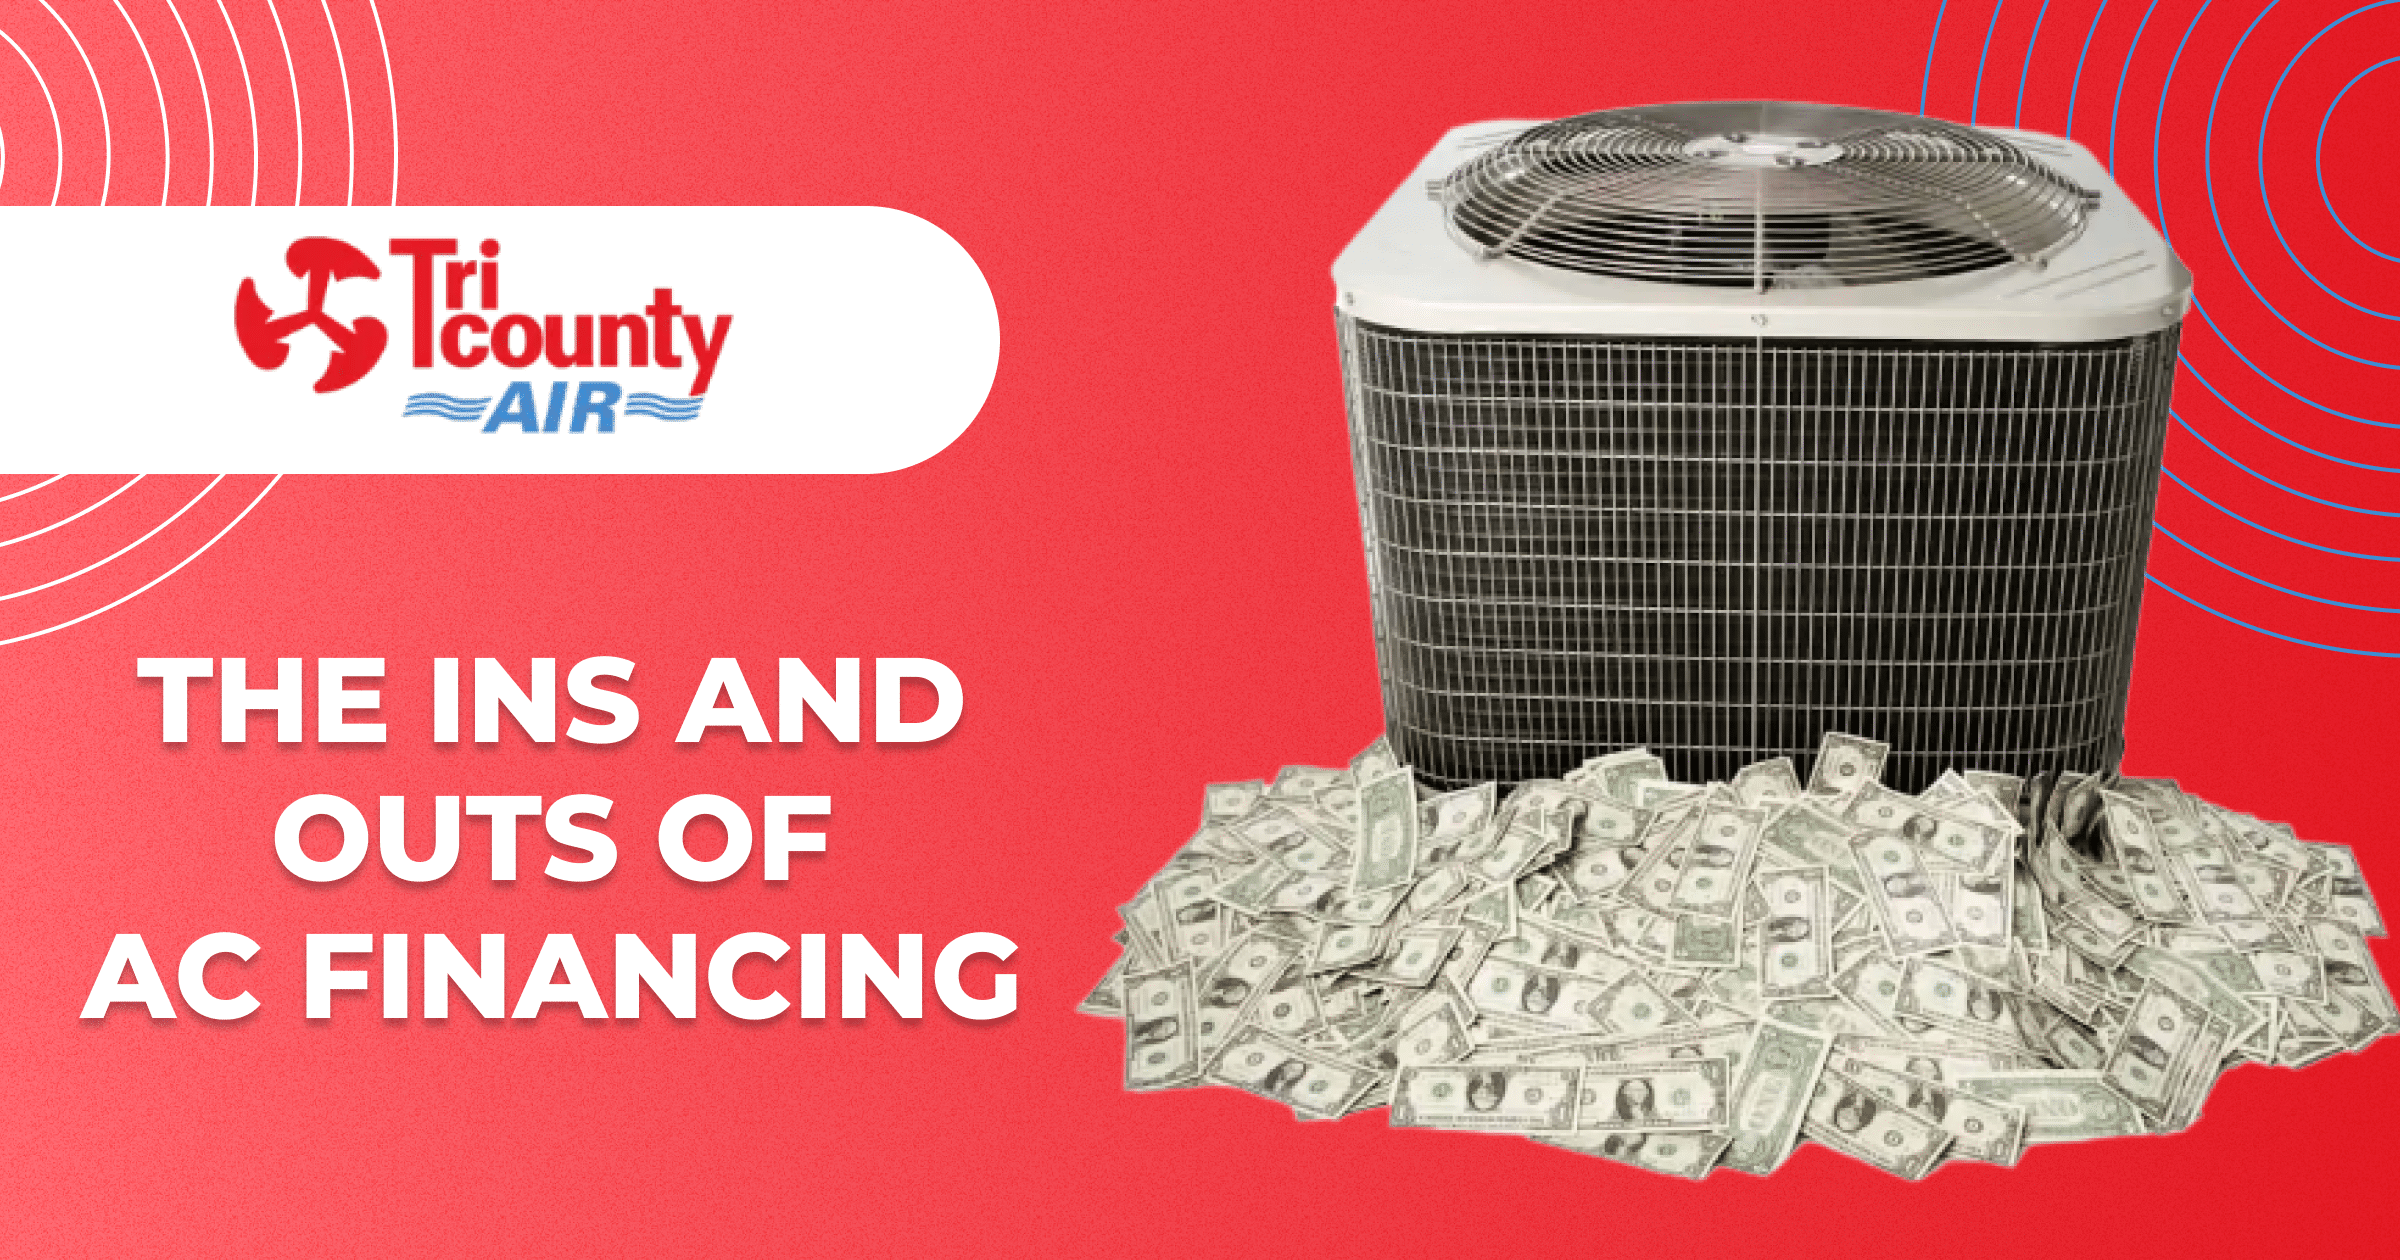 The Ins and Outs of AC Financing